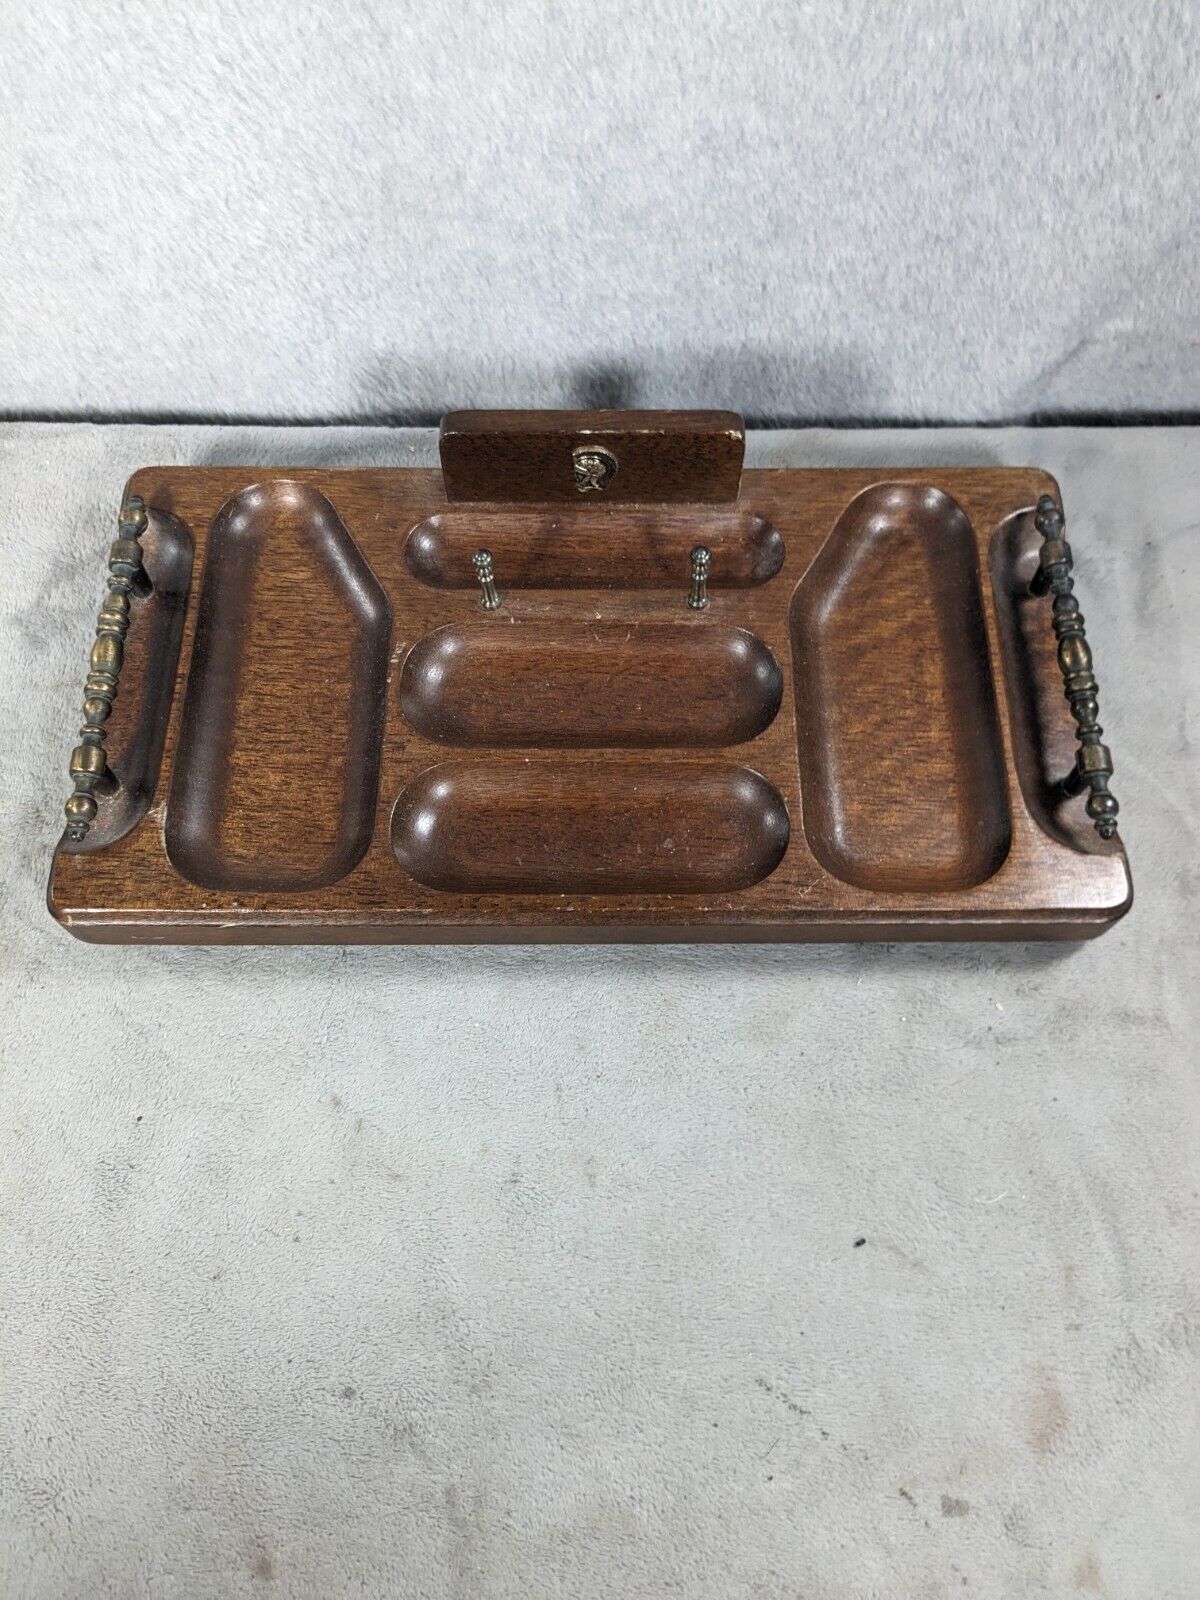 Vintage Swank Japan Wooden Valet, Entryway Catchall, Keys, Jewelry, Coin Tray